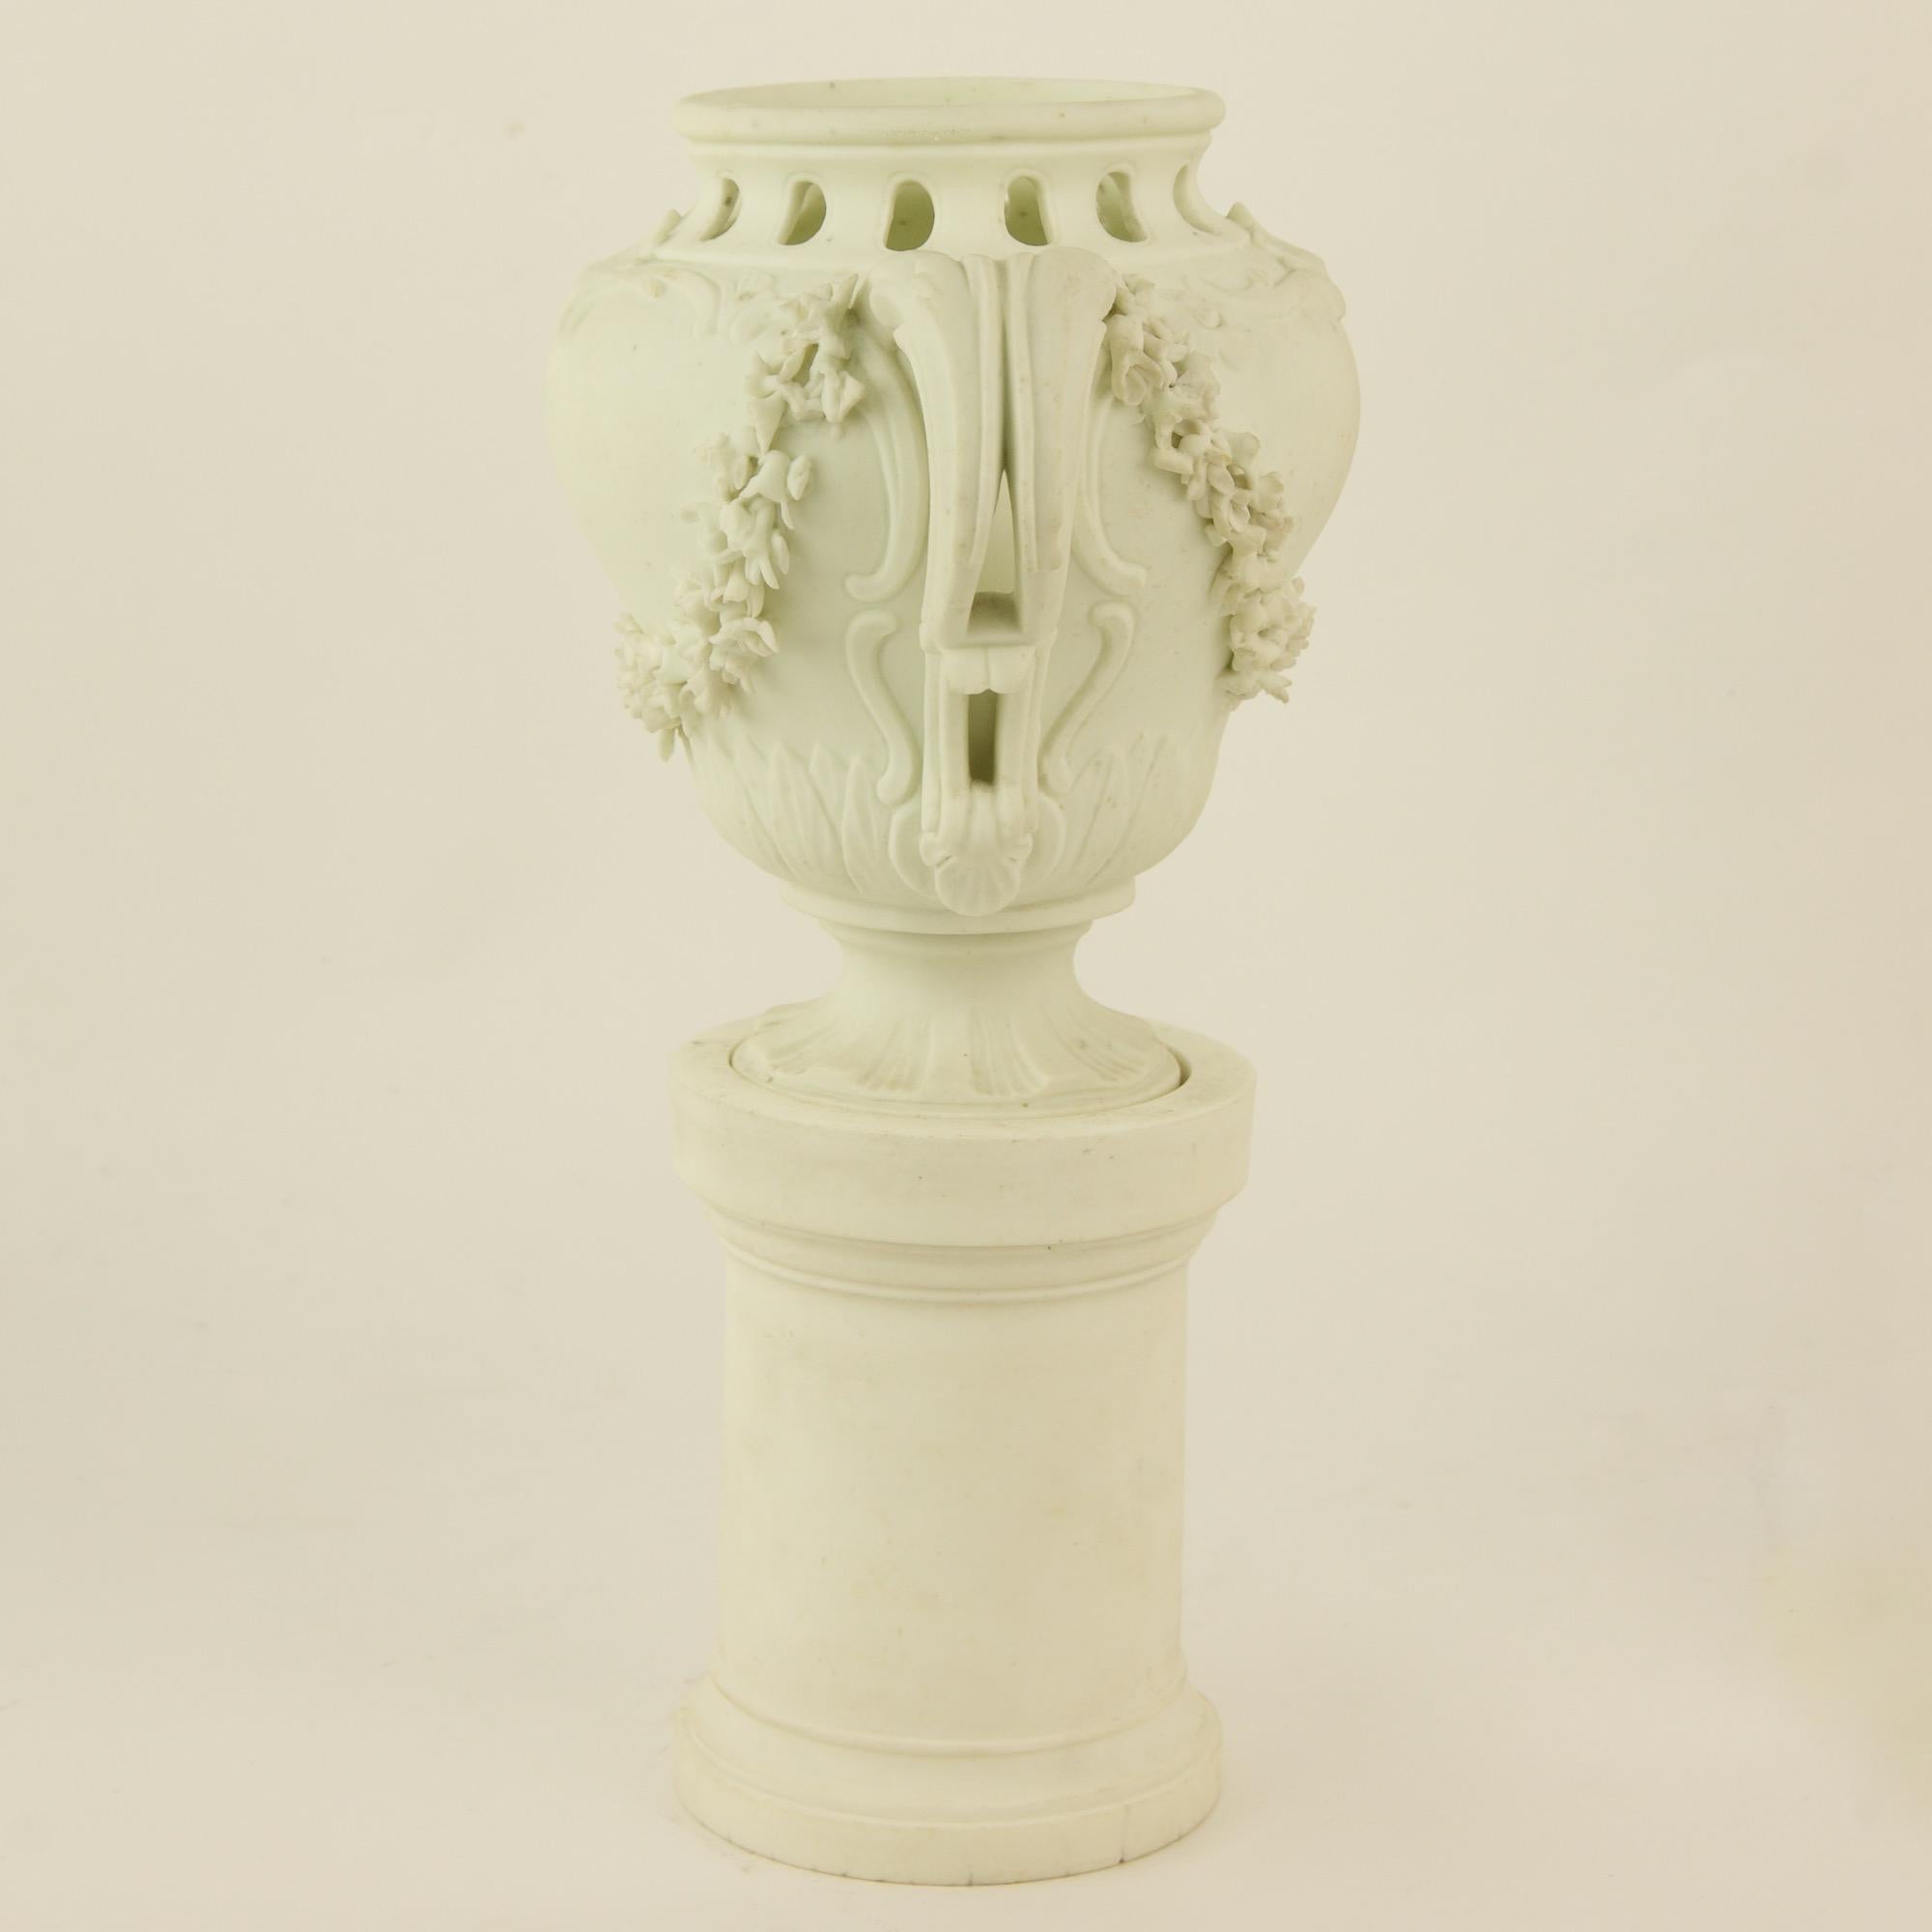 Pair of French Mid-18th Century Biscuit Porcelain Louis XV Vases and Pedestals For Sale 6